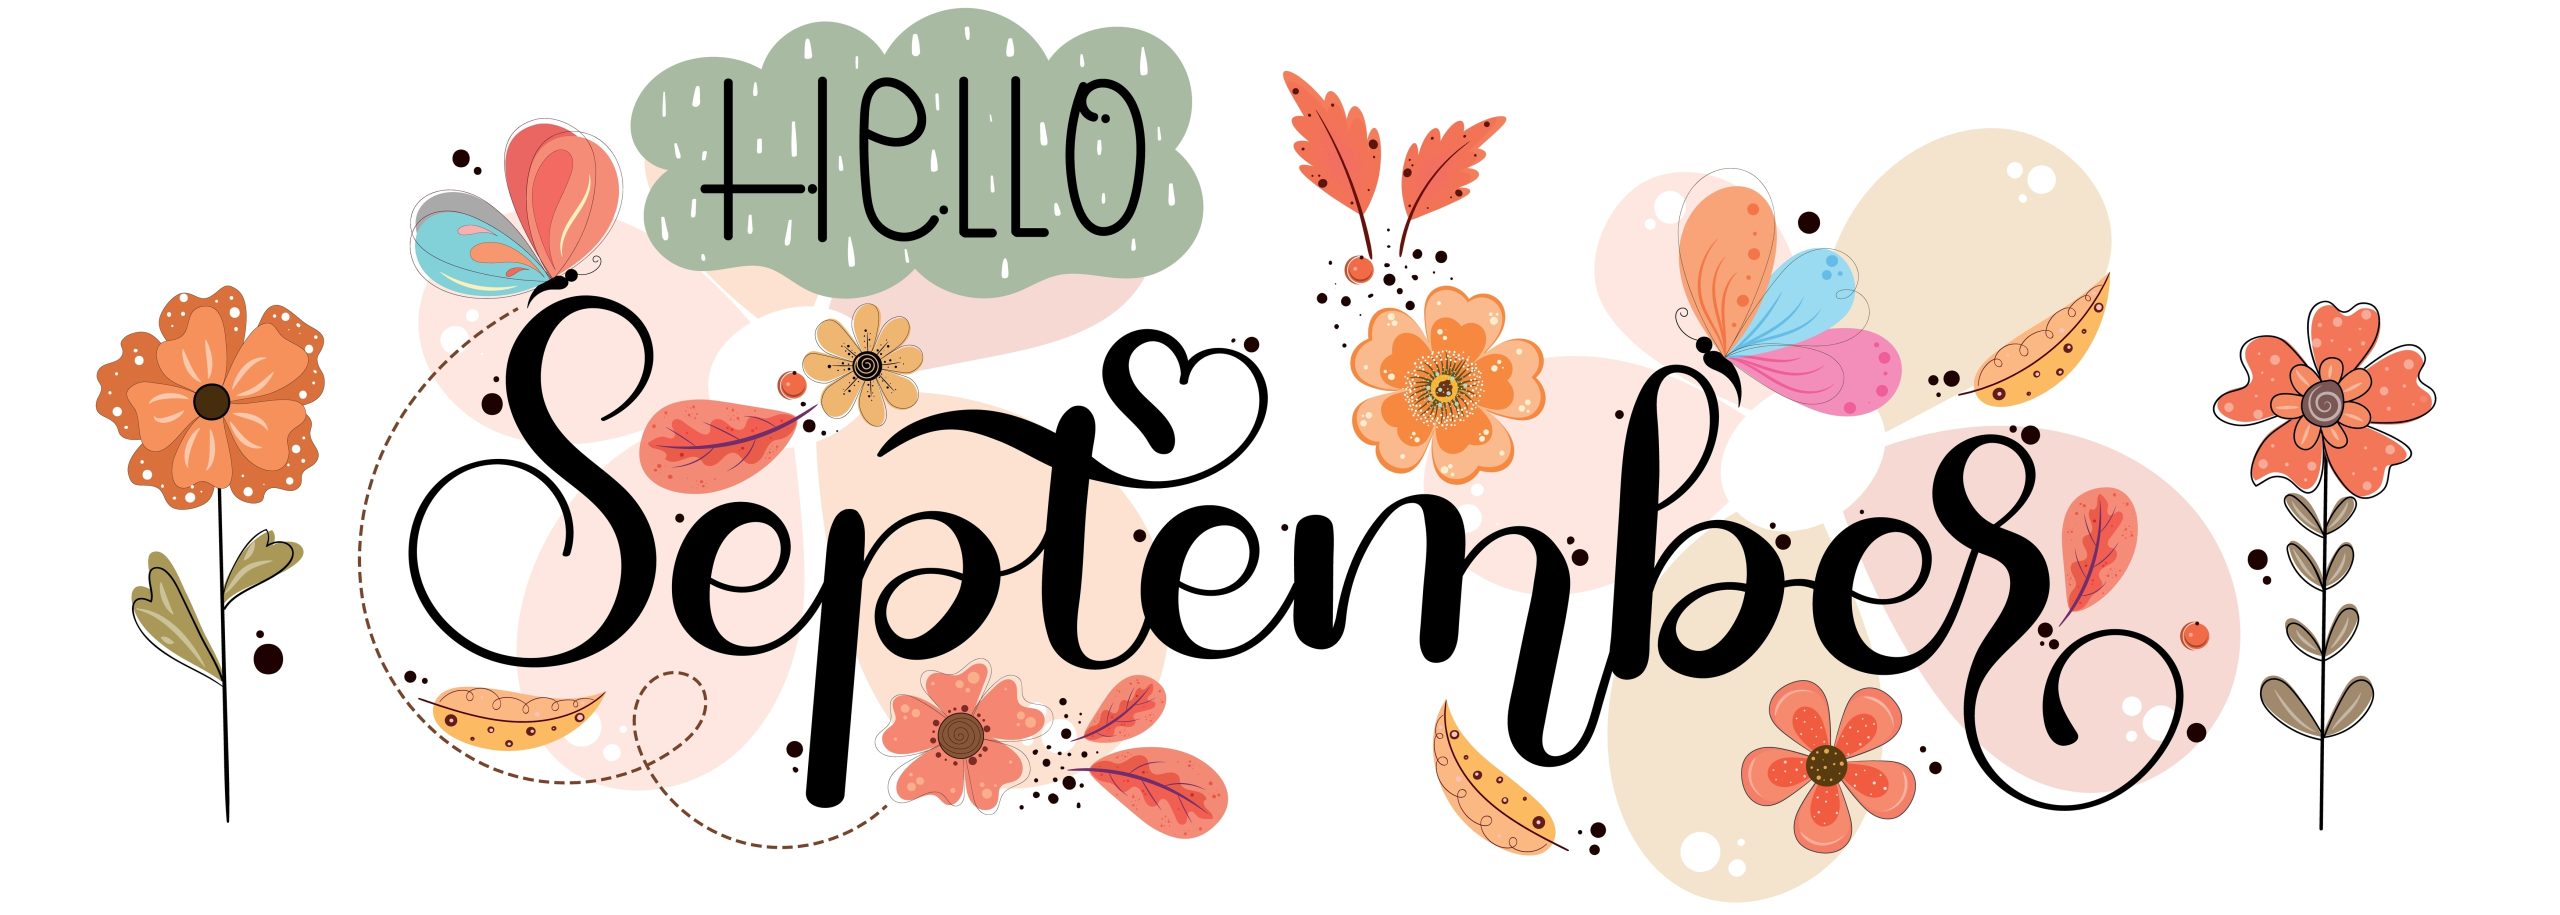 flowers and leaves with cursive writing stating Hello September